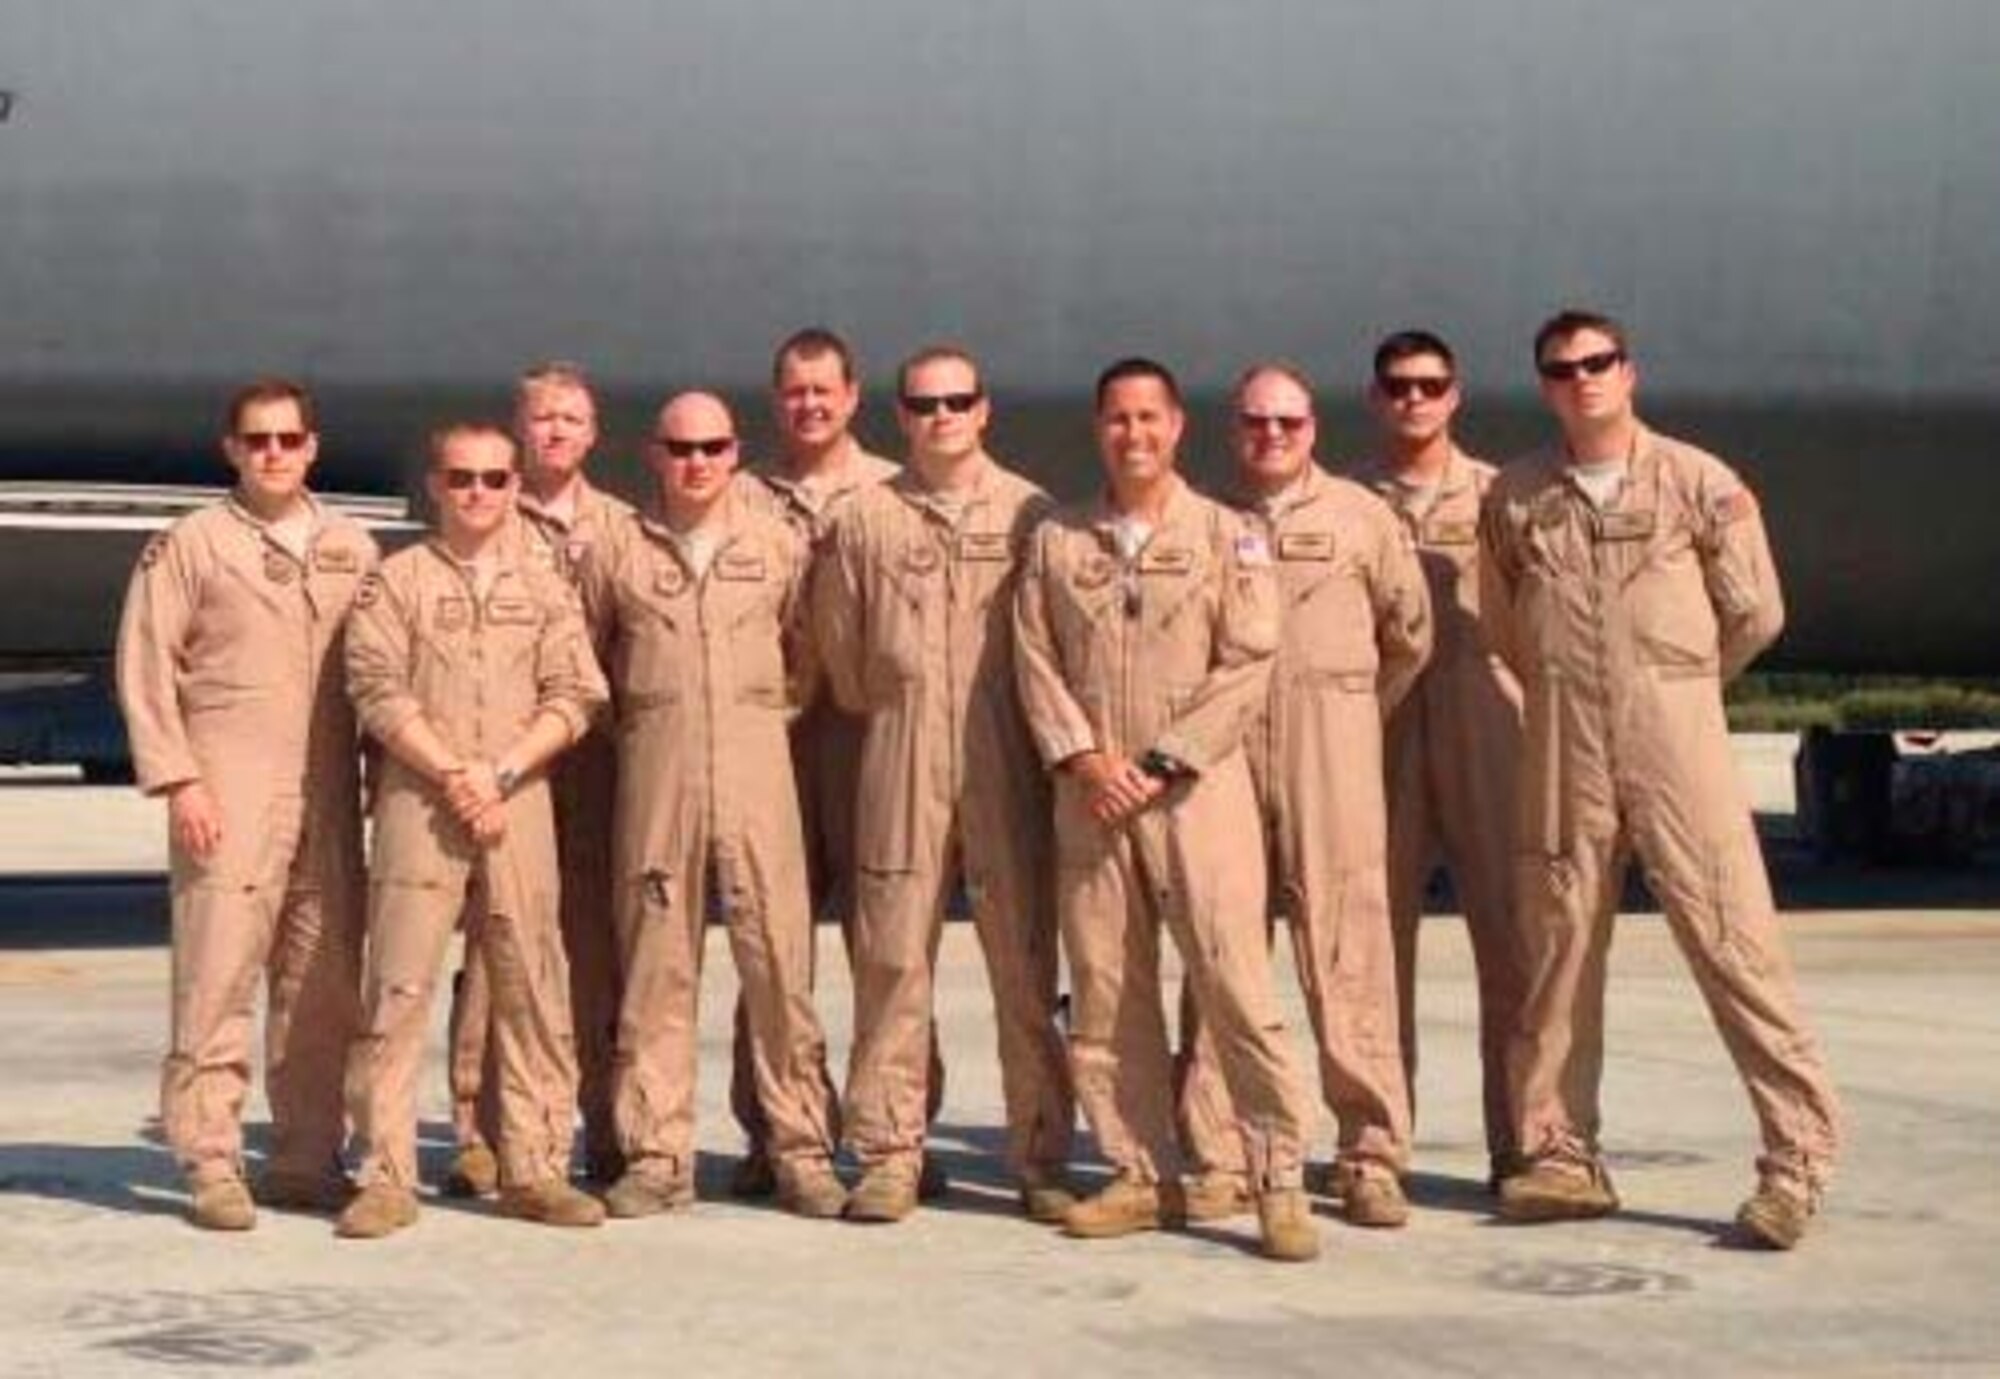 Crew members, slated to receive the 2013 Earl T. Ricks award pose in front of a C-5 Galaxy April 19, 2013. During an overseas mission the aircraft struck multiple birds during takeoff. Two engines were damaged but the crew manged to return the aircraft safely to the airfield.